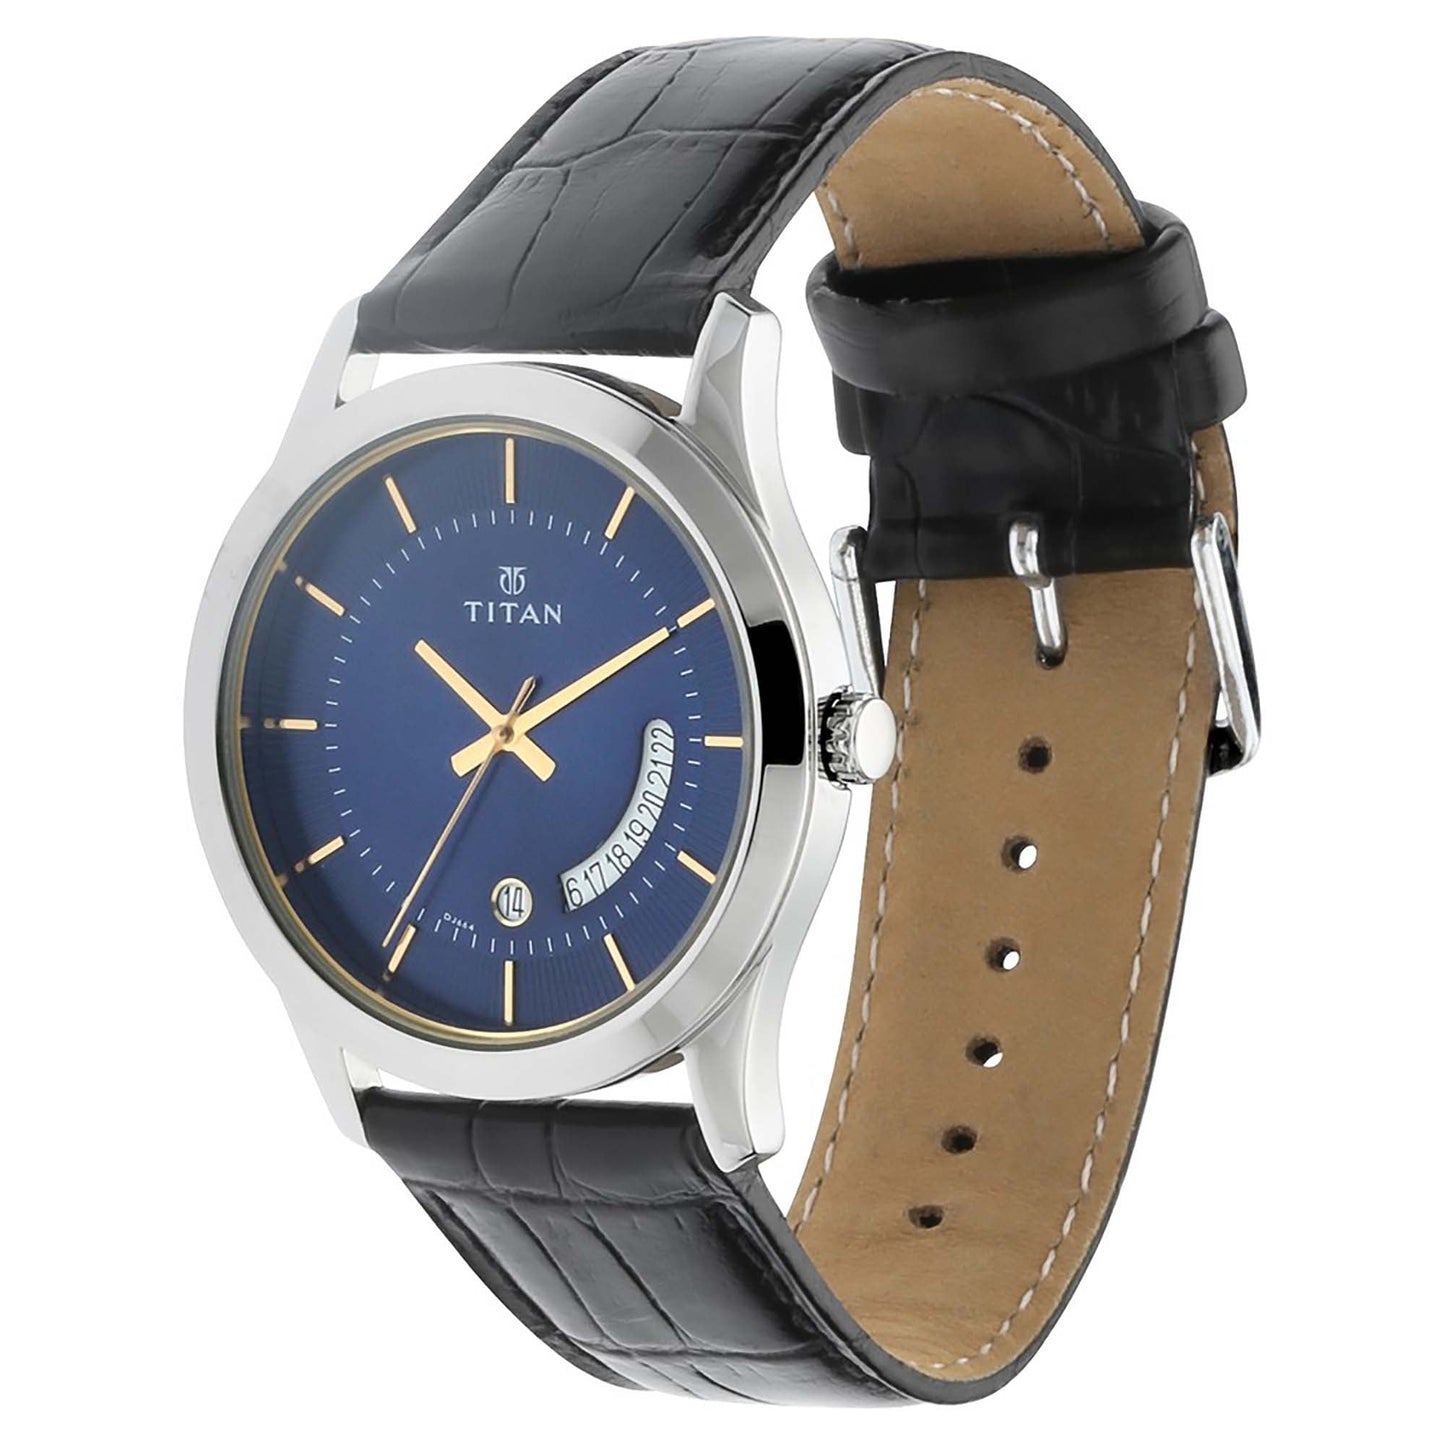 Titan Blue Dial Analog with Date Leather Strap watch for Men